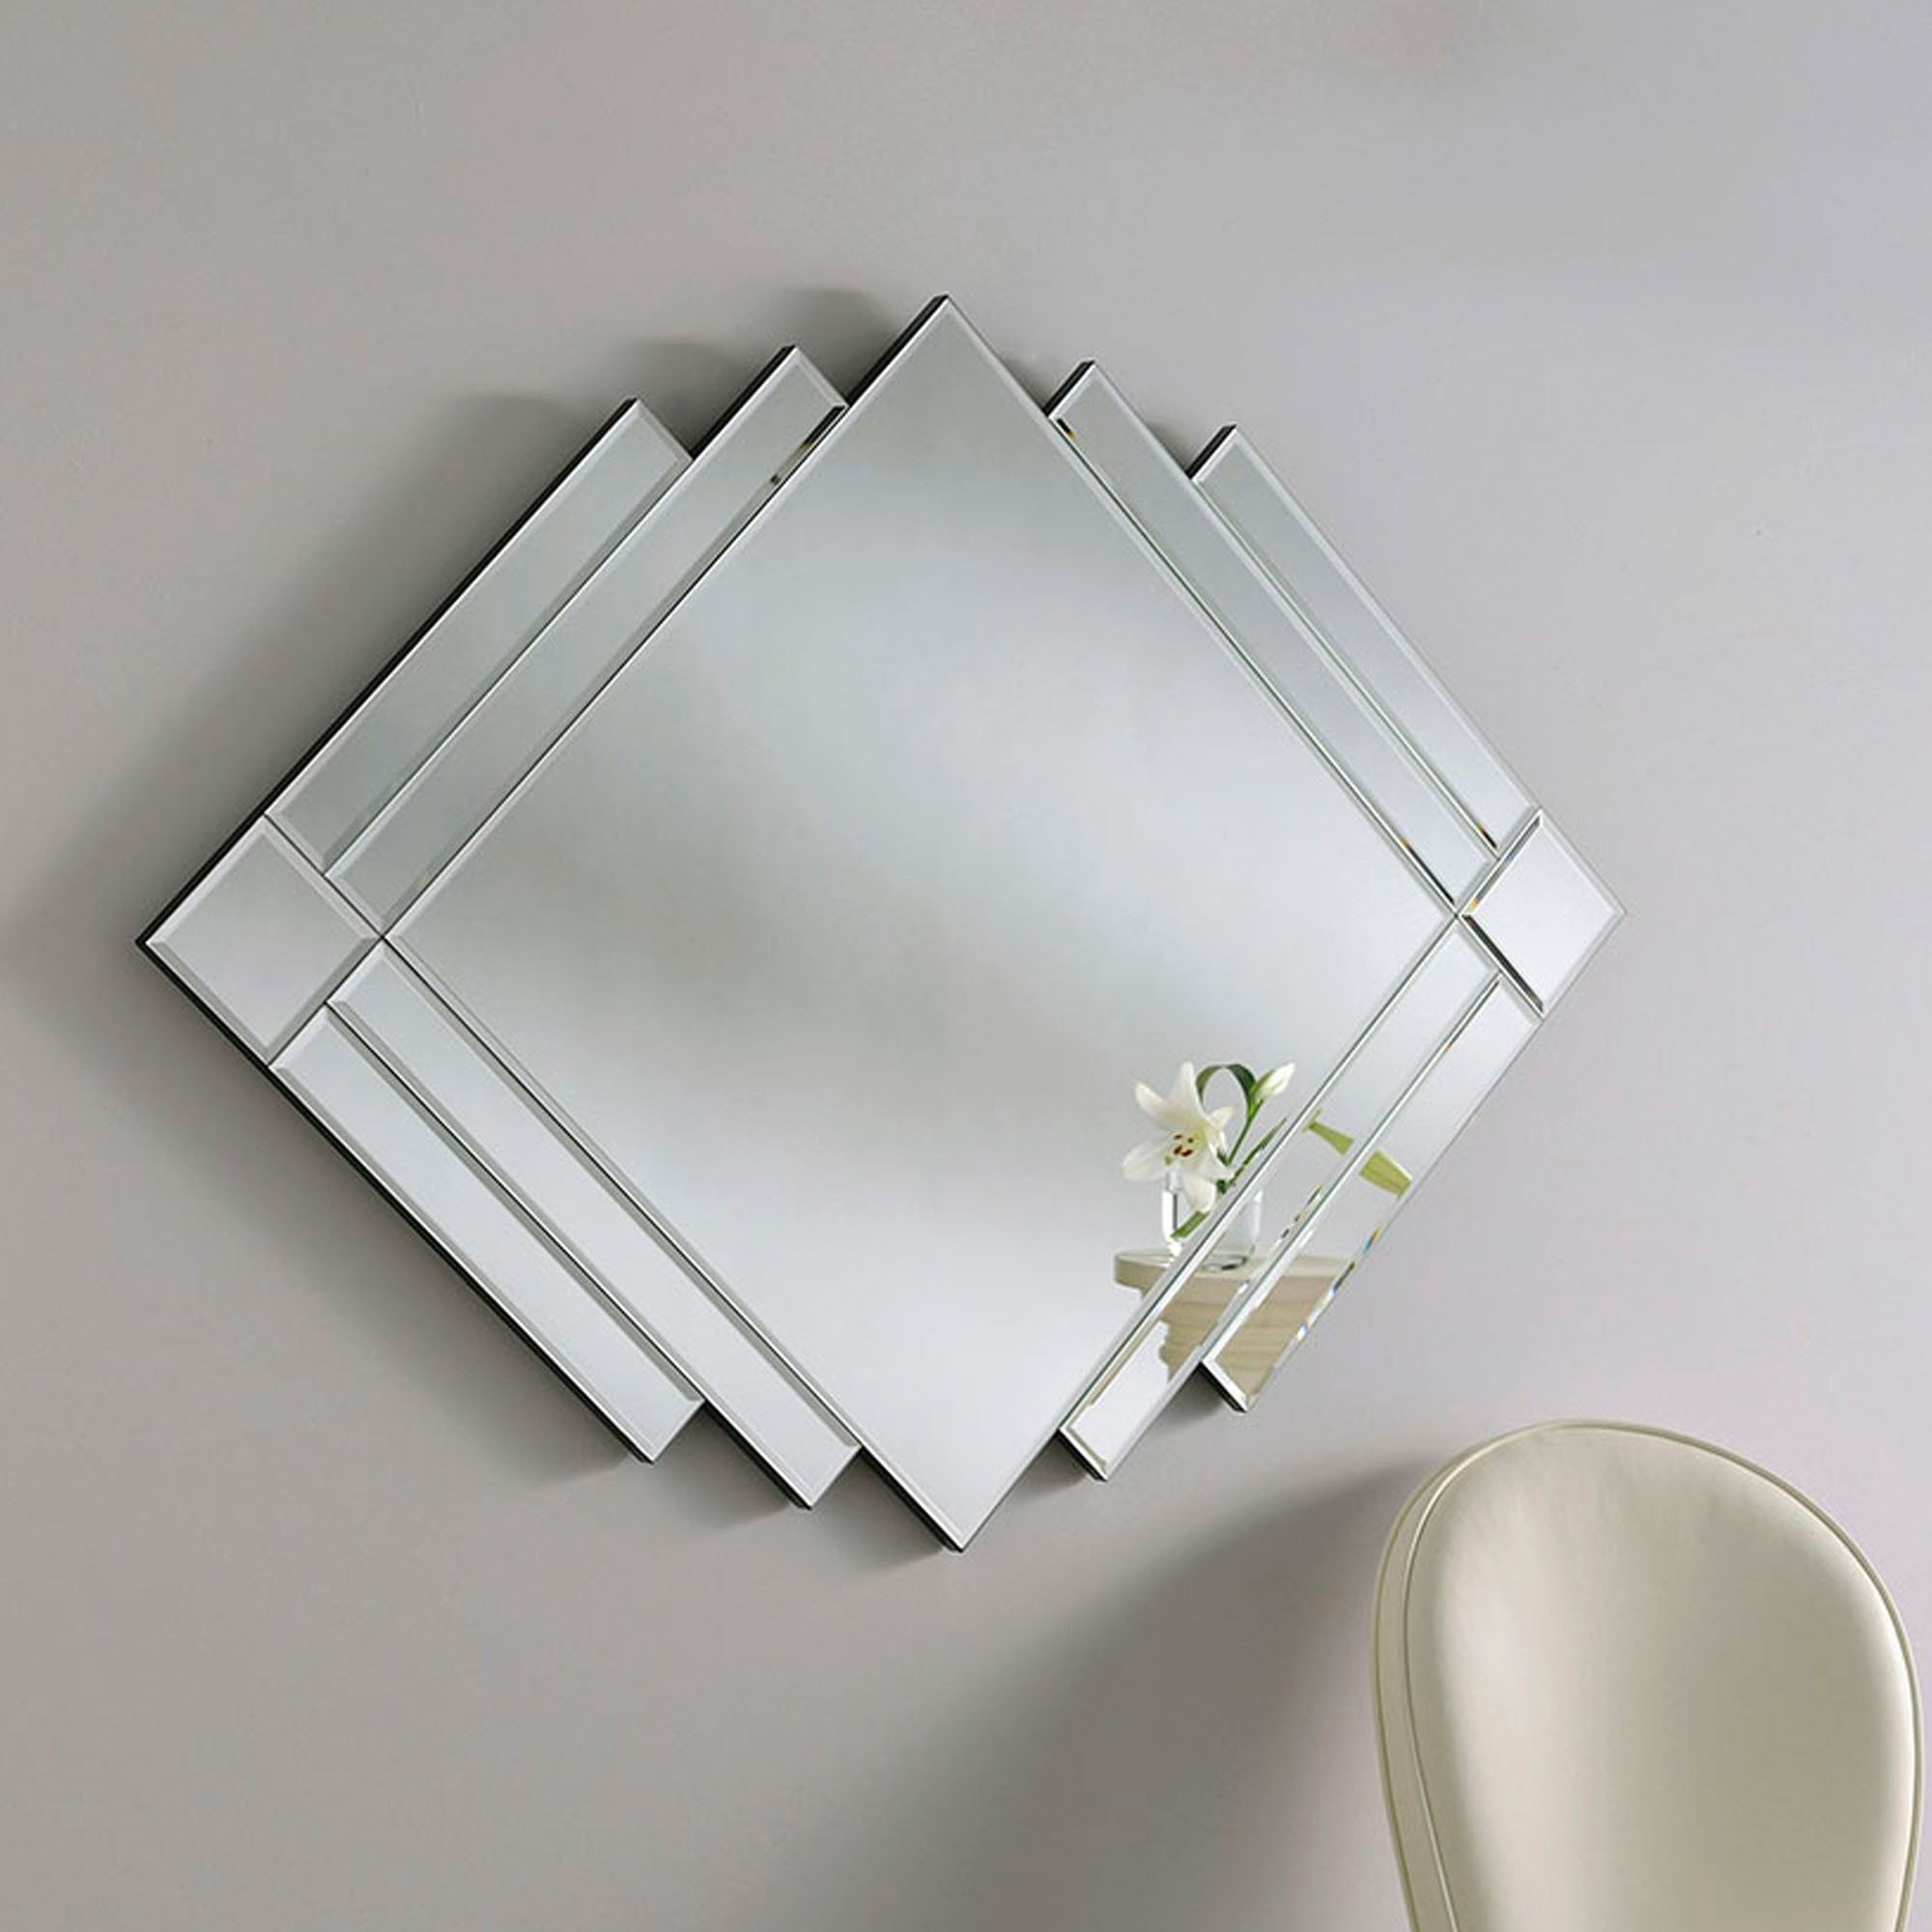 Art Deco Silver Wall Mirror | Contemporary Wall Mirrors Intended For Printed Art Glass Wall Mirrors (View 12 of 15)